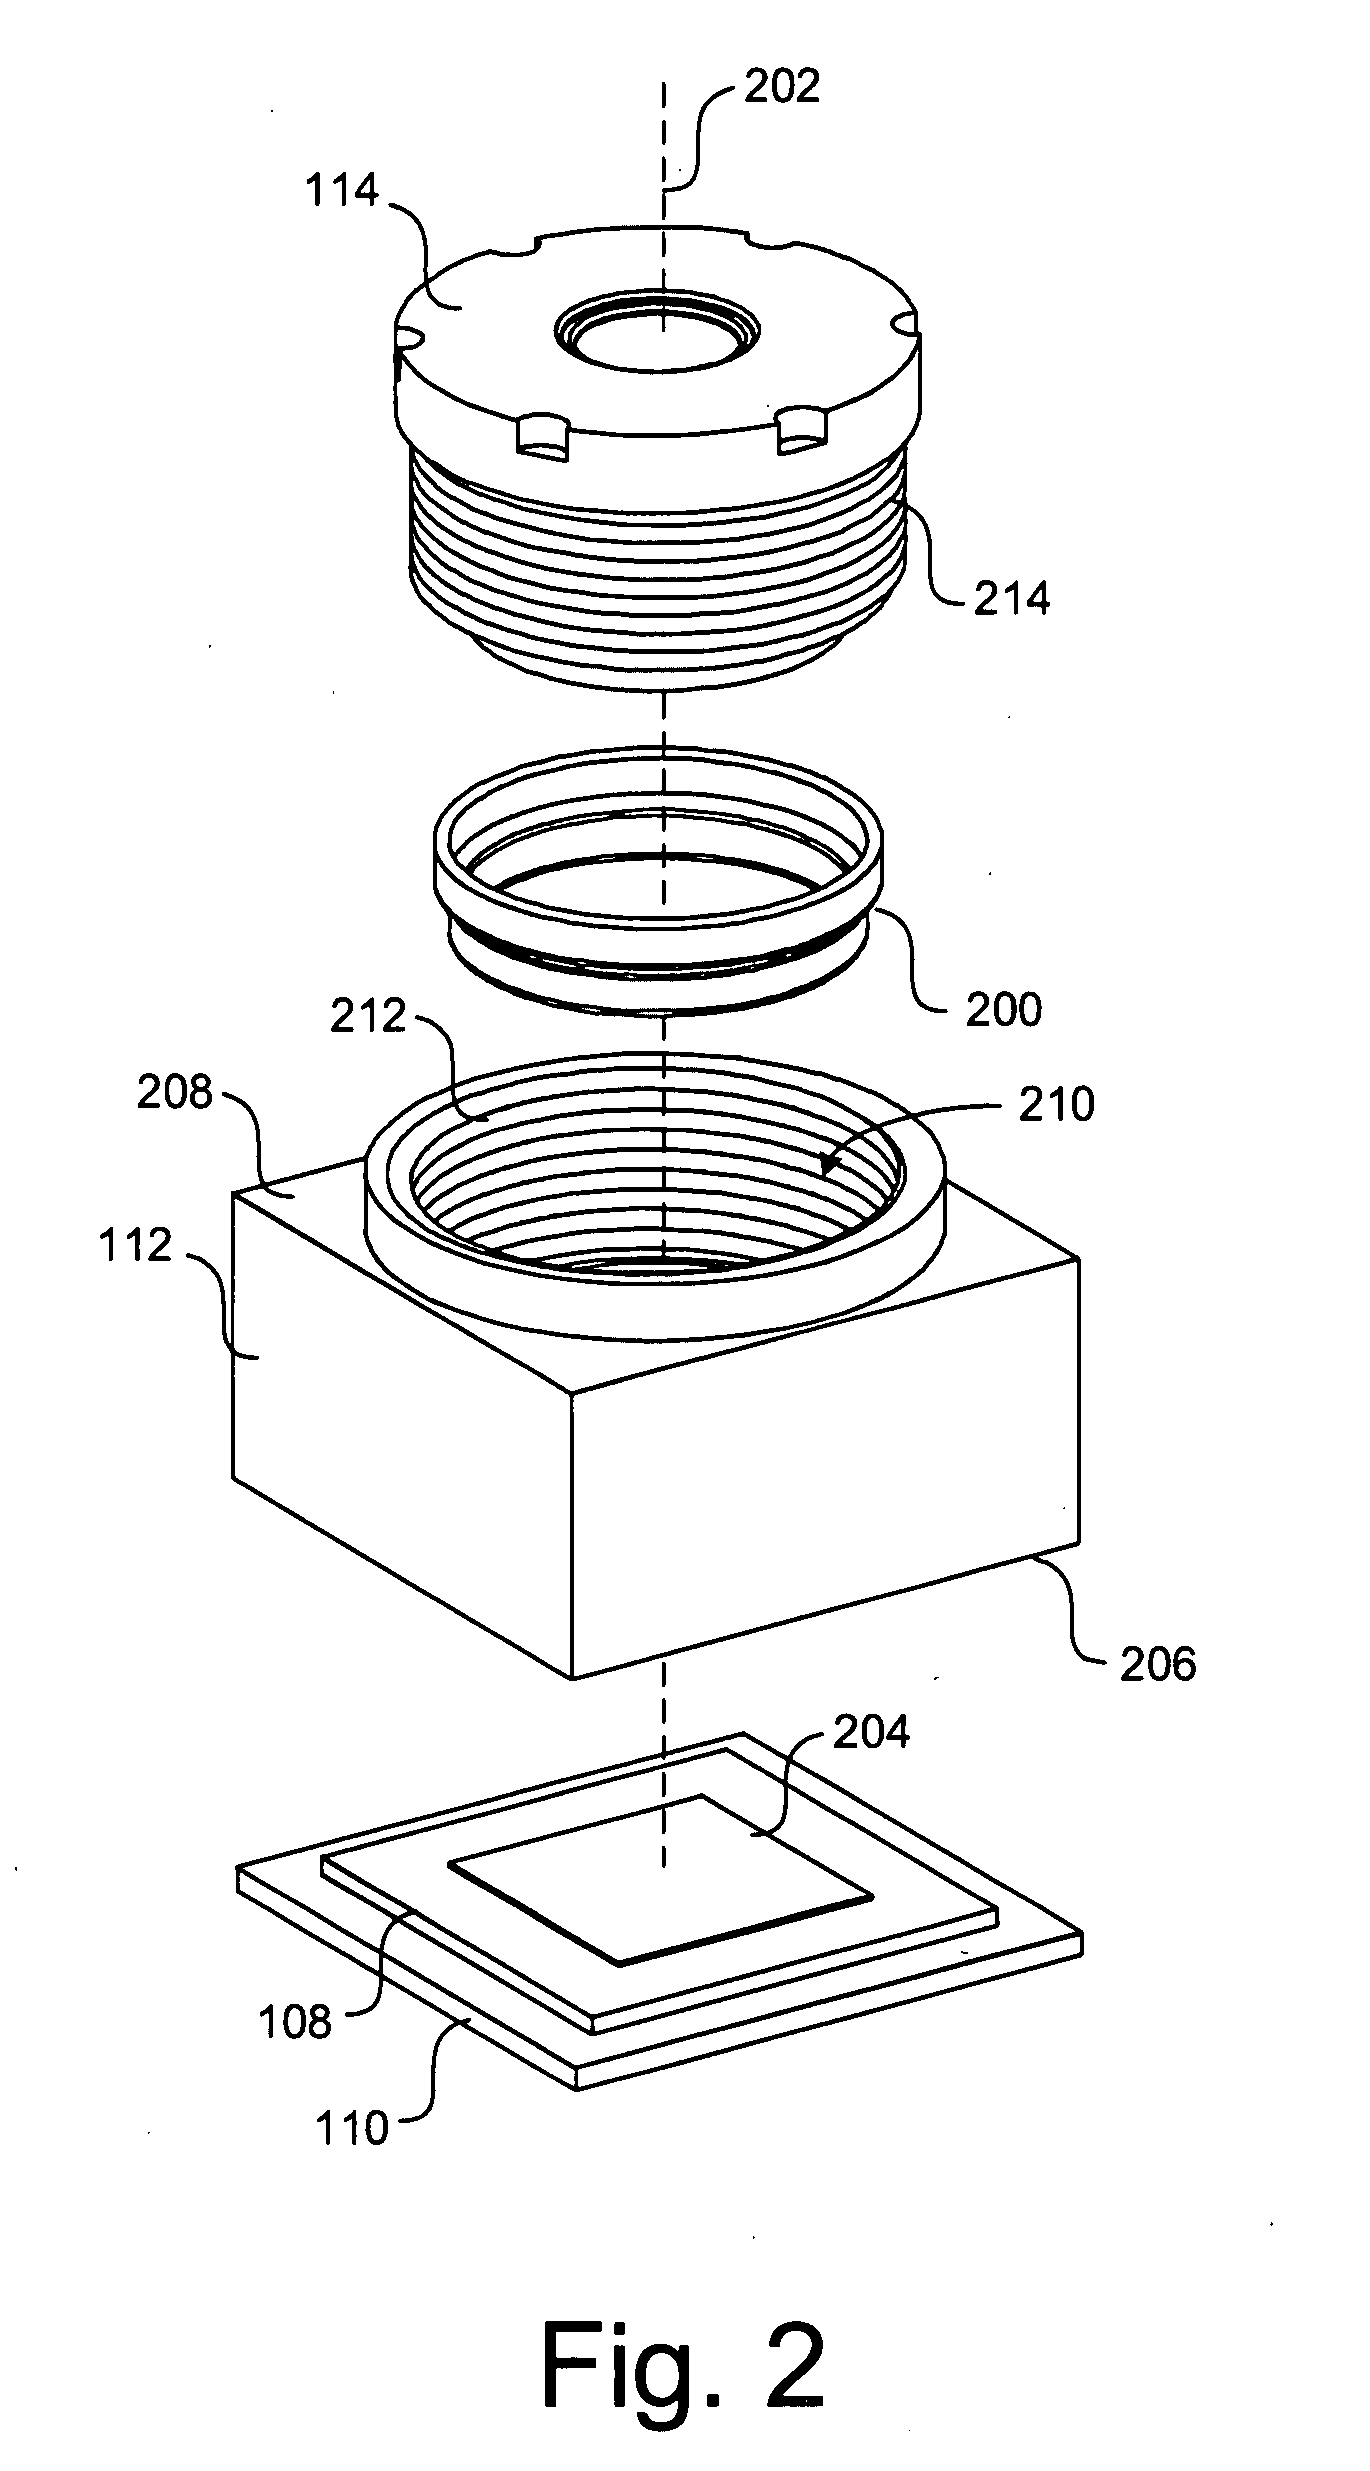 Camera module with contamination reduction feature